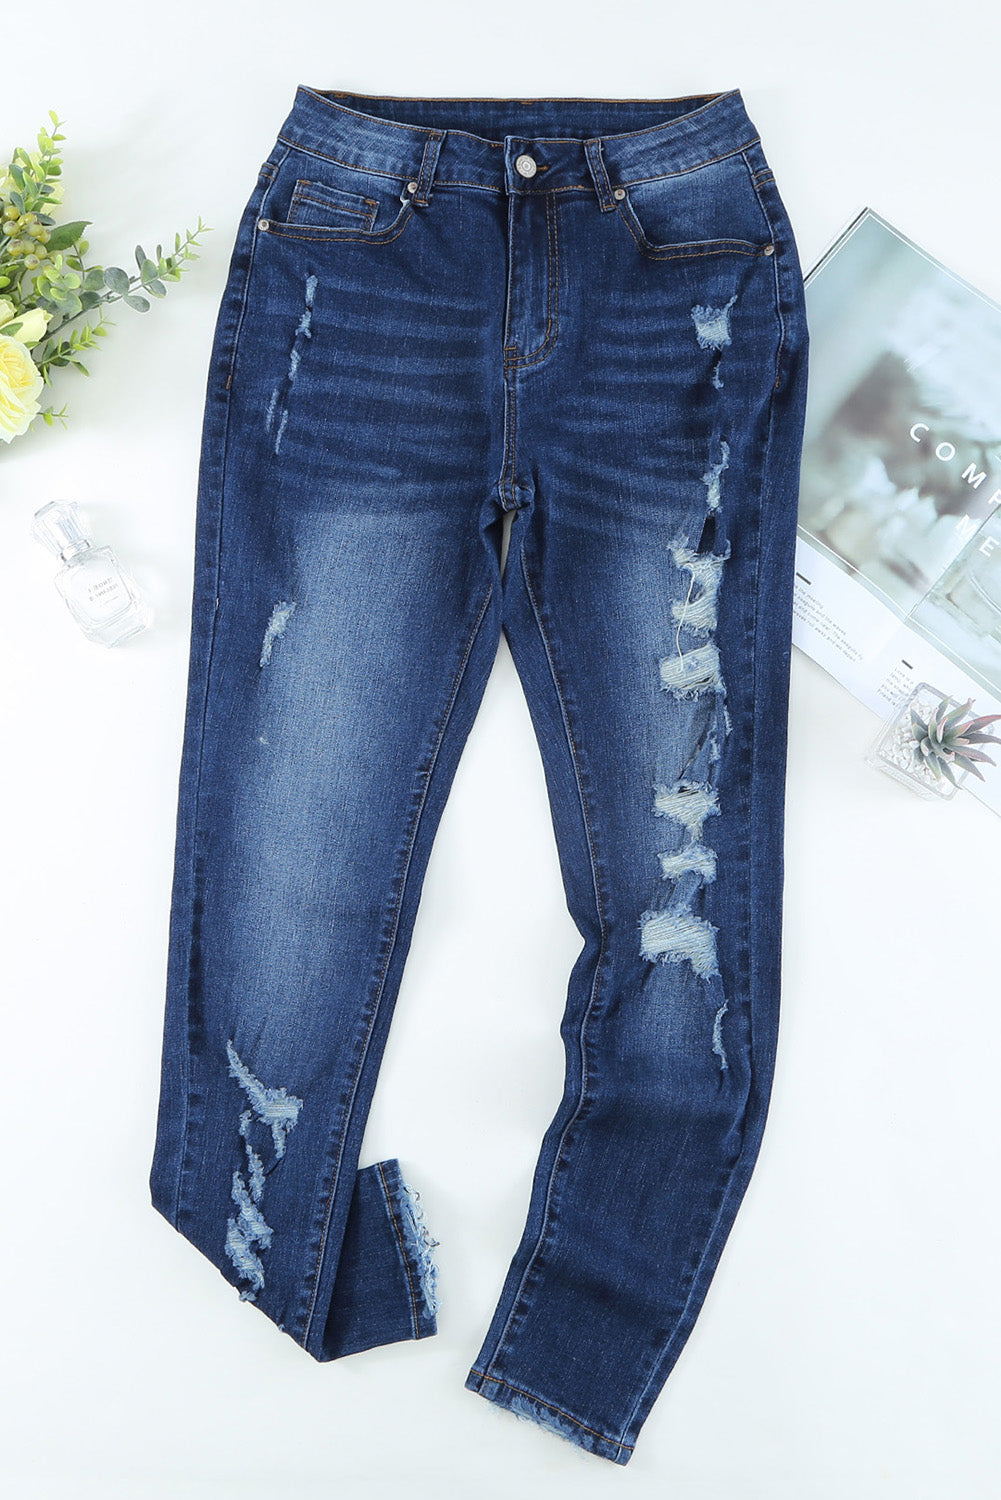 Distressed High Waist Skinny Jeans | Swanky Doll Clothing